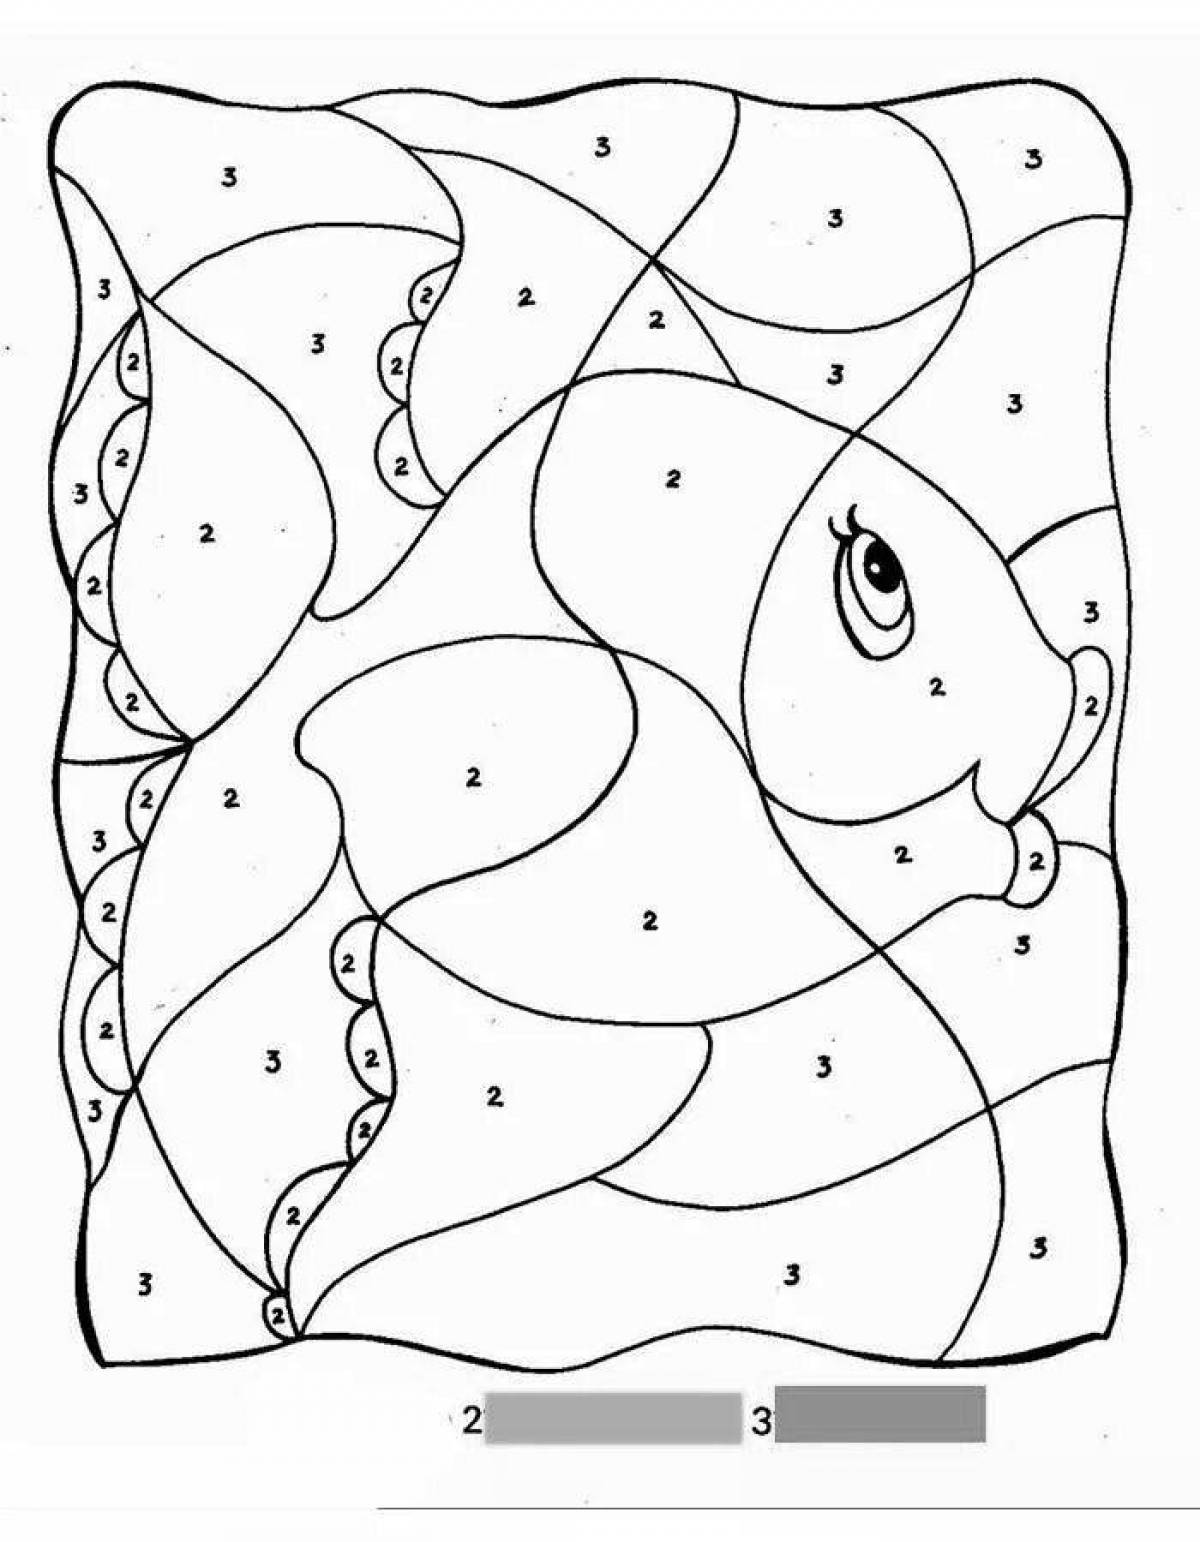 Fun number coloring page for kids